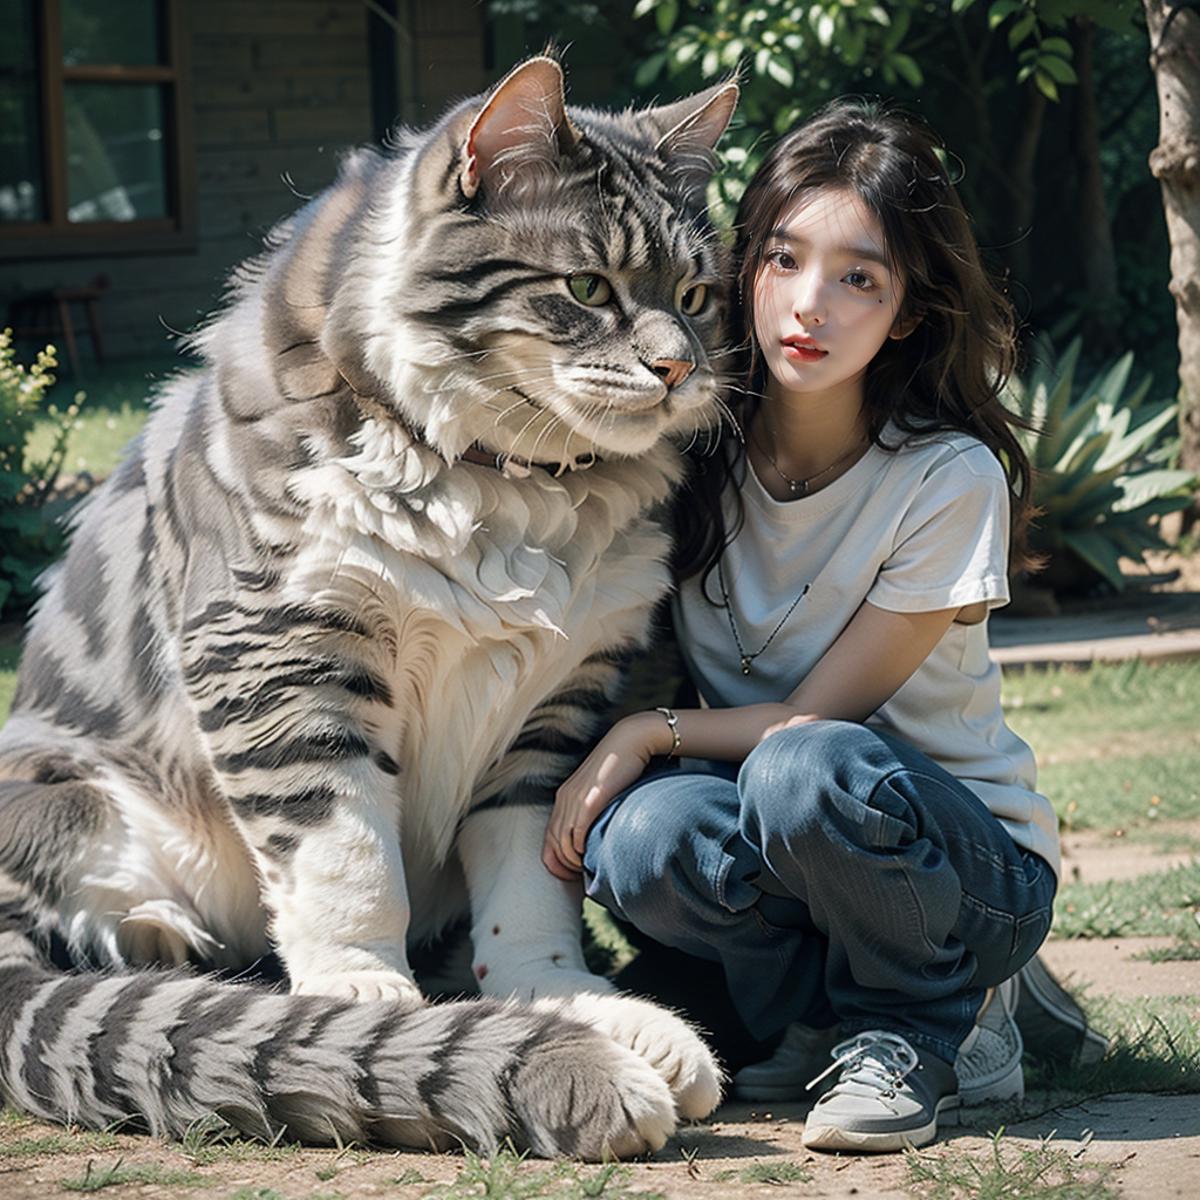 A girl sits next to a large striped cat on the grass.